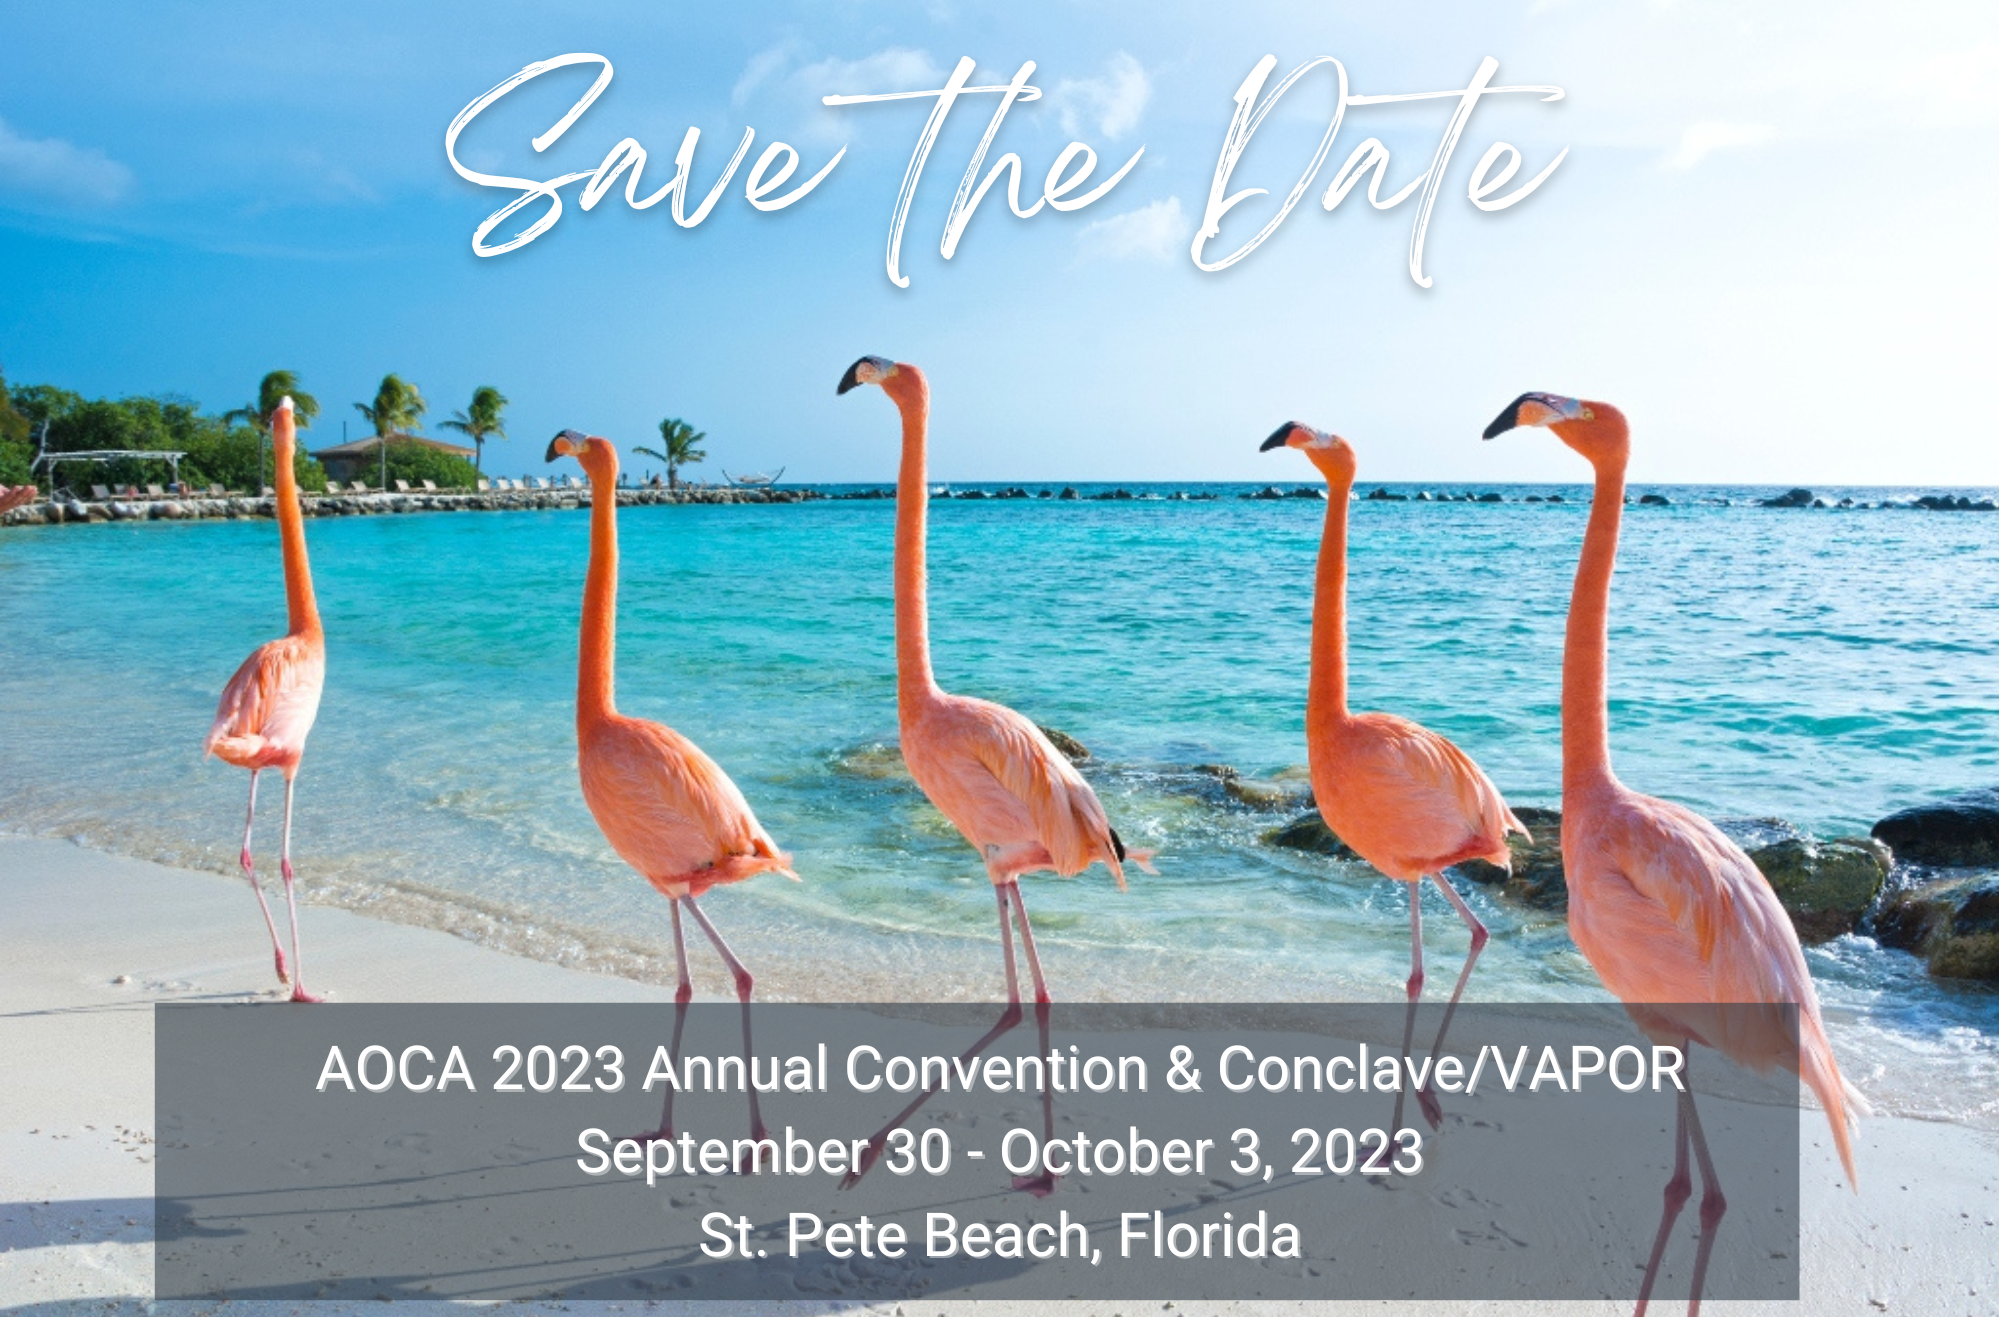 AOCA 2023 Annual Convention Save the Date | Sept 30-Oct 3, St. Pete Beach, FL